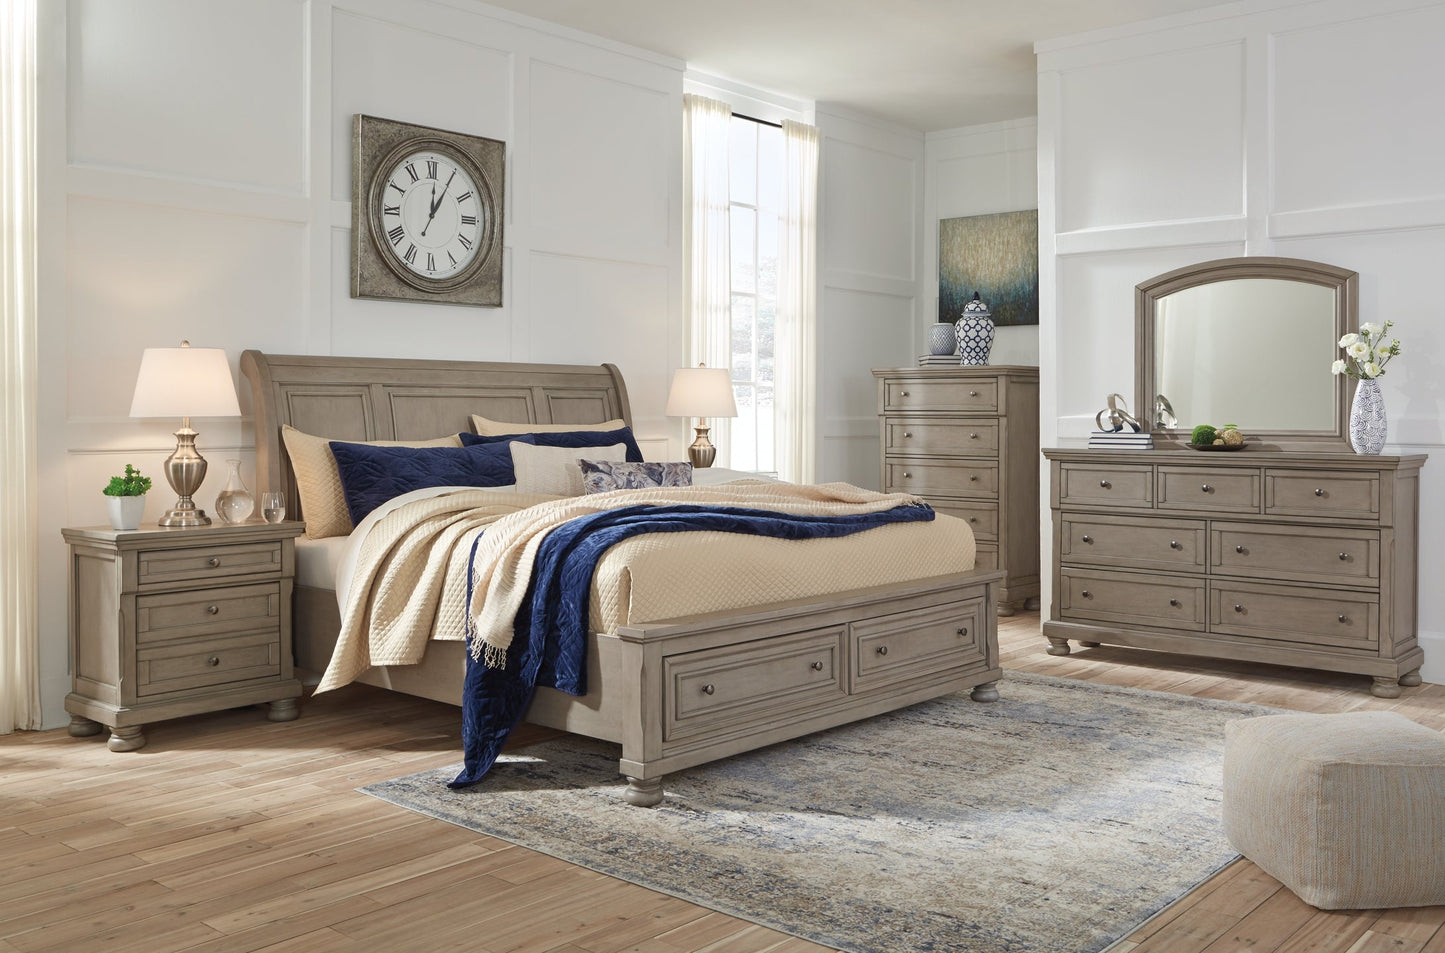 Lettner King Sleigh Bed with 2 Storage Drawers with Dresser at Walker Mattress and Furniture Locations in Cedar Park and Belton TX.